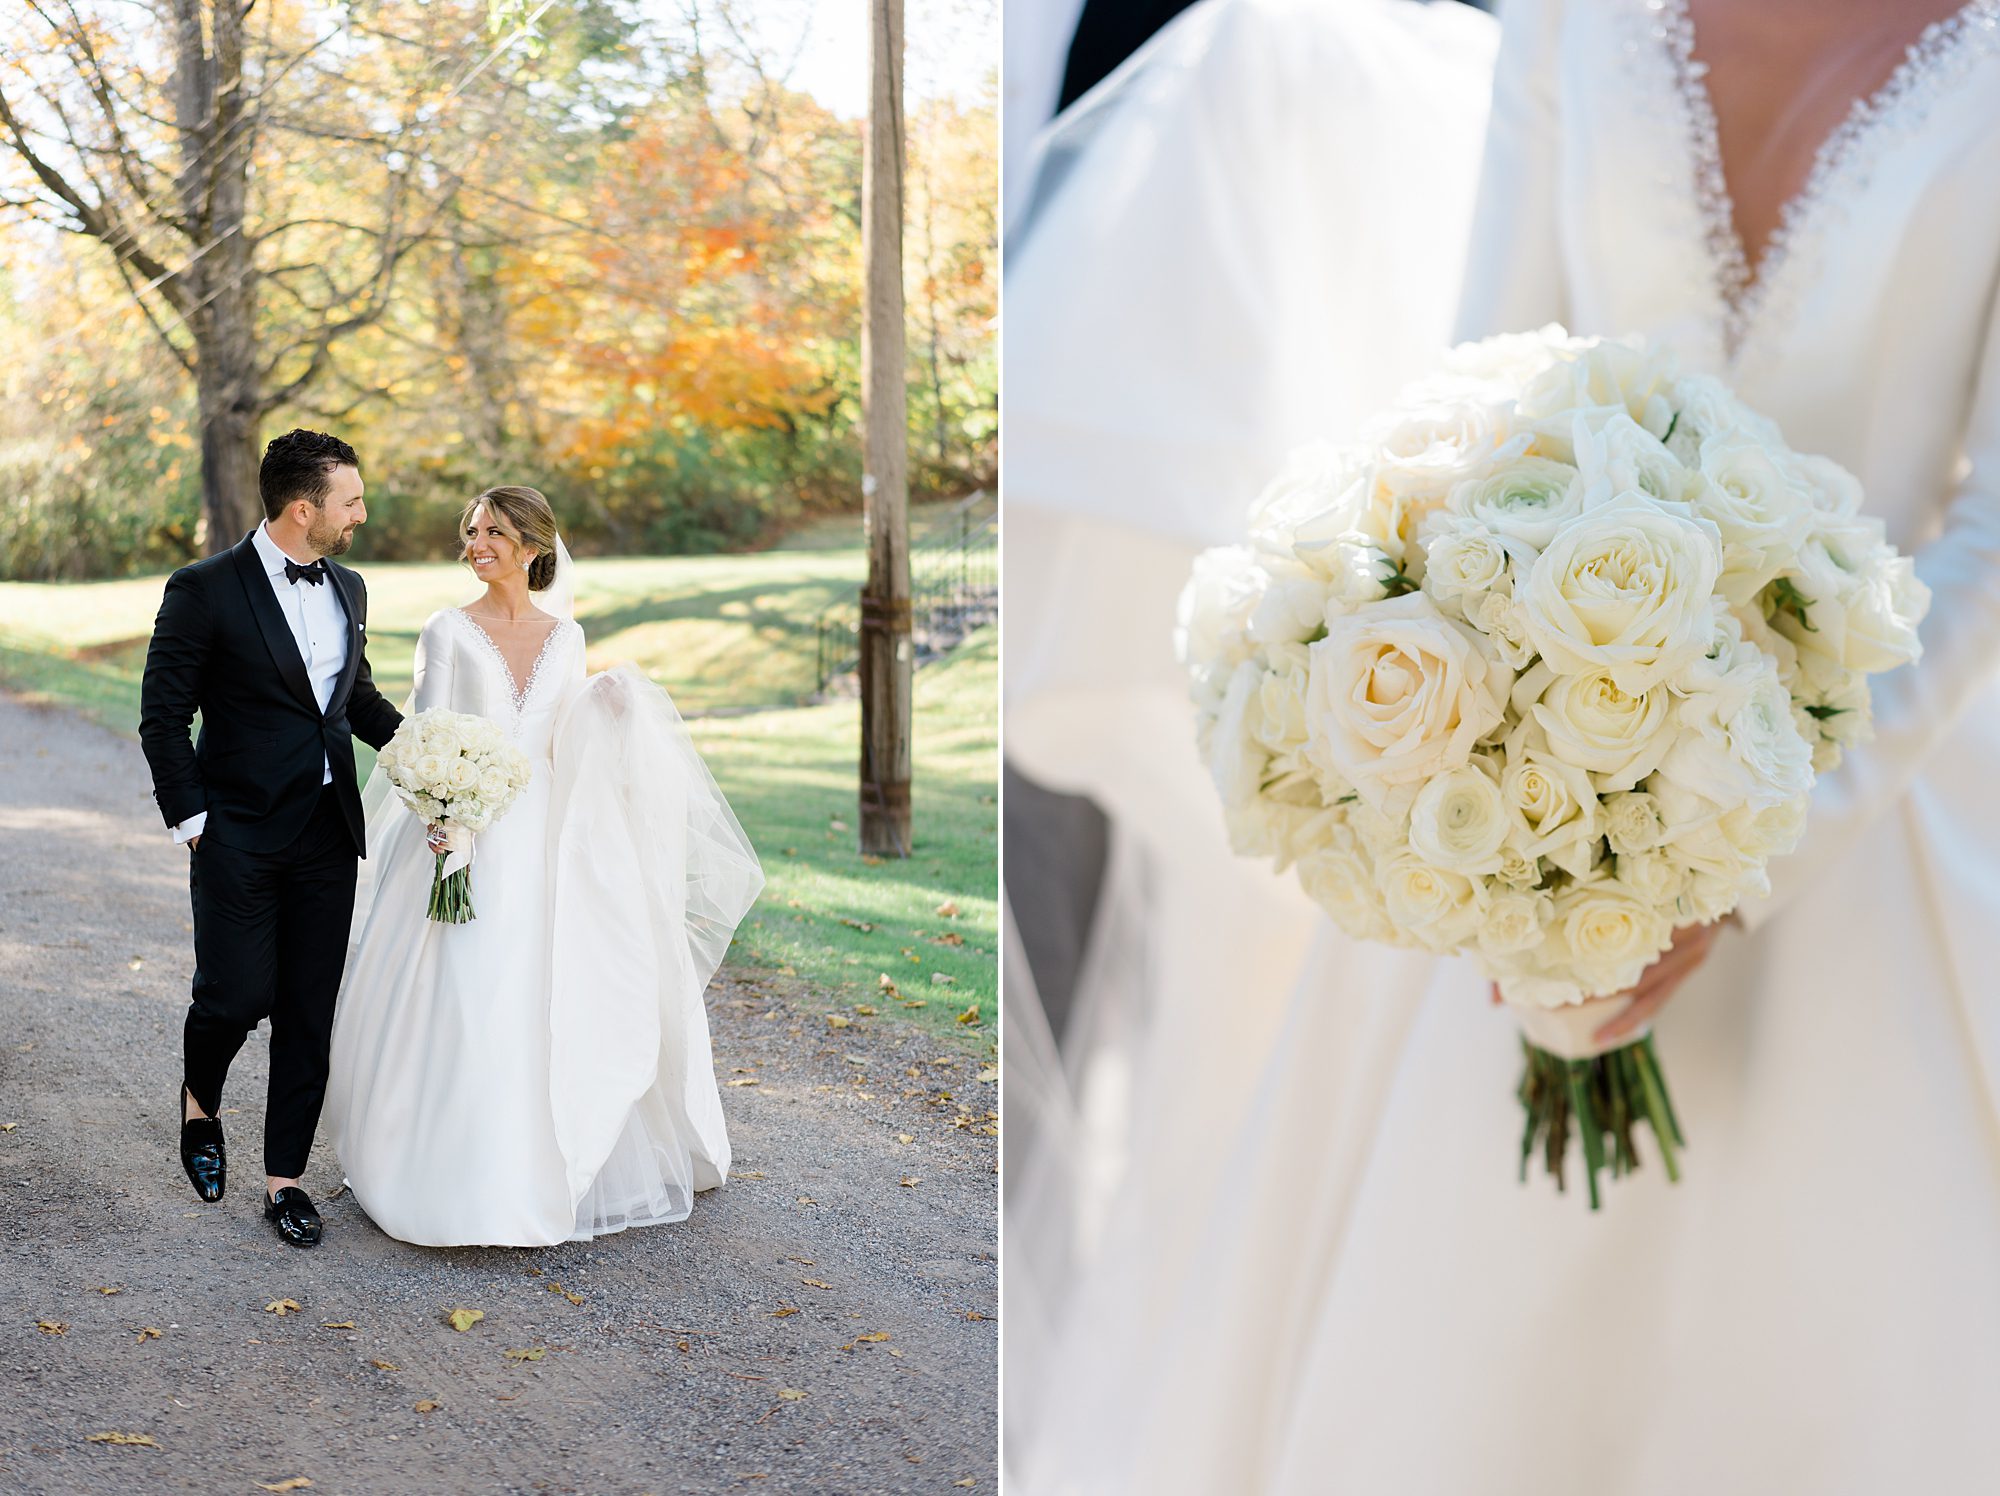 timeless wedding bouquet of white roses